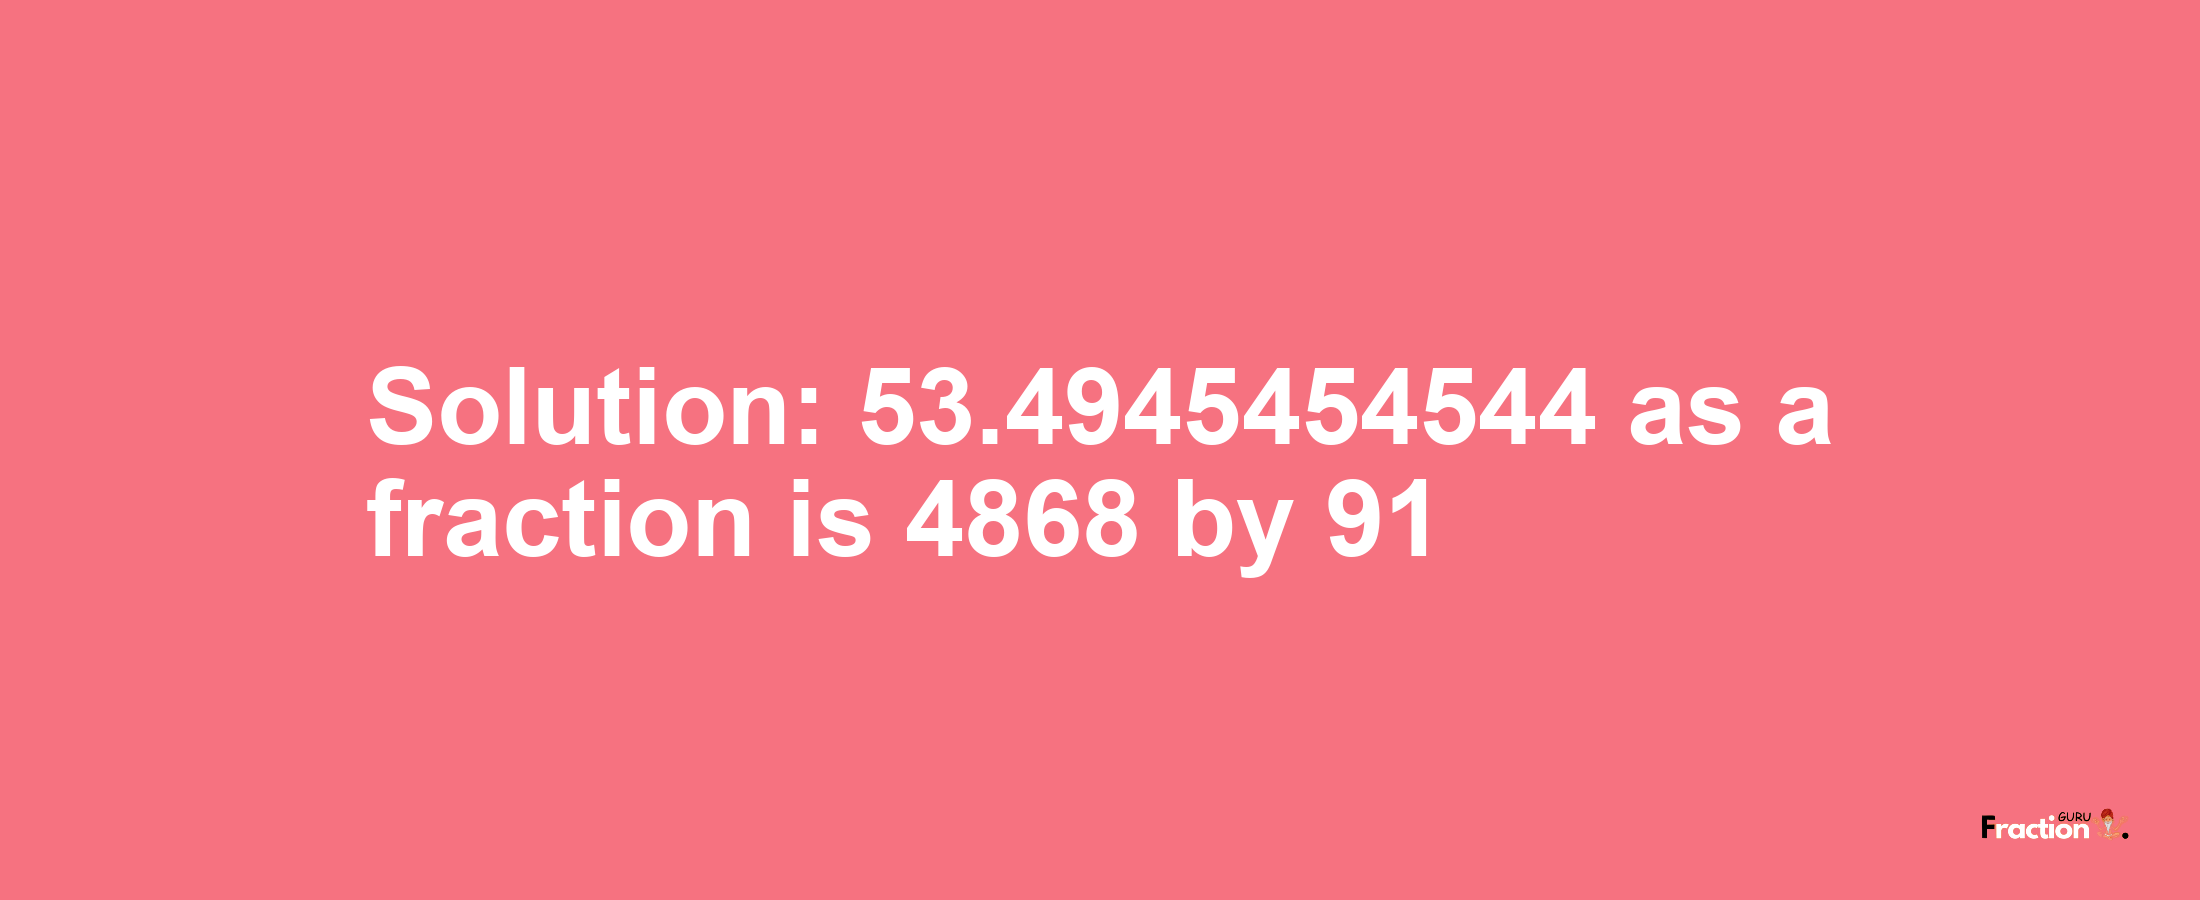 Solution:53.4945454544 as a fraction is 4868/91